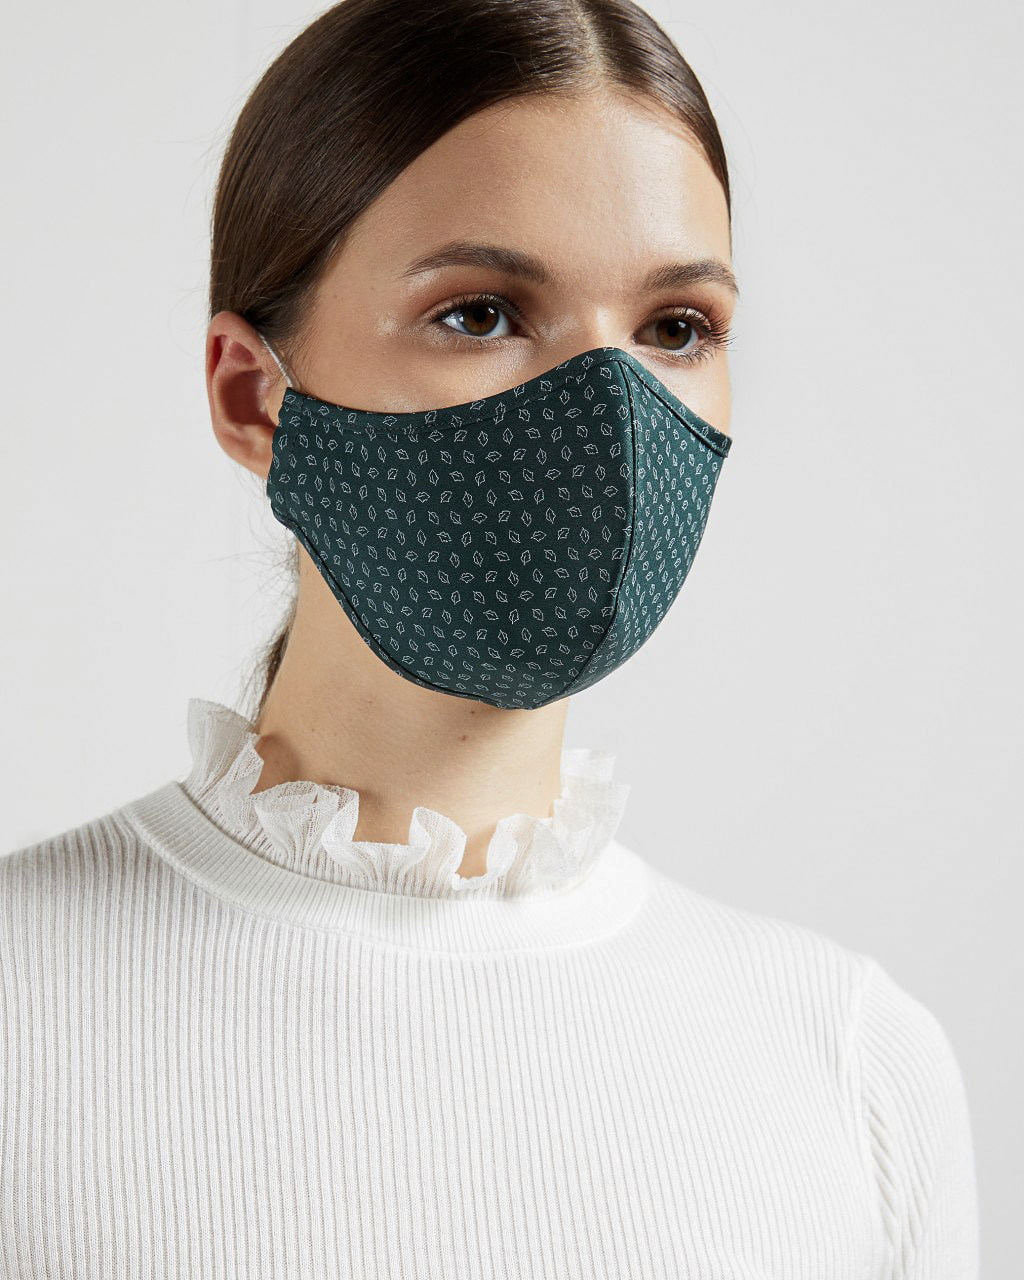 Ted Baker reversible printed face mask